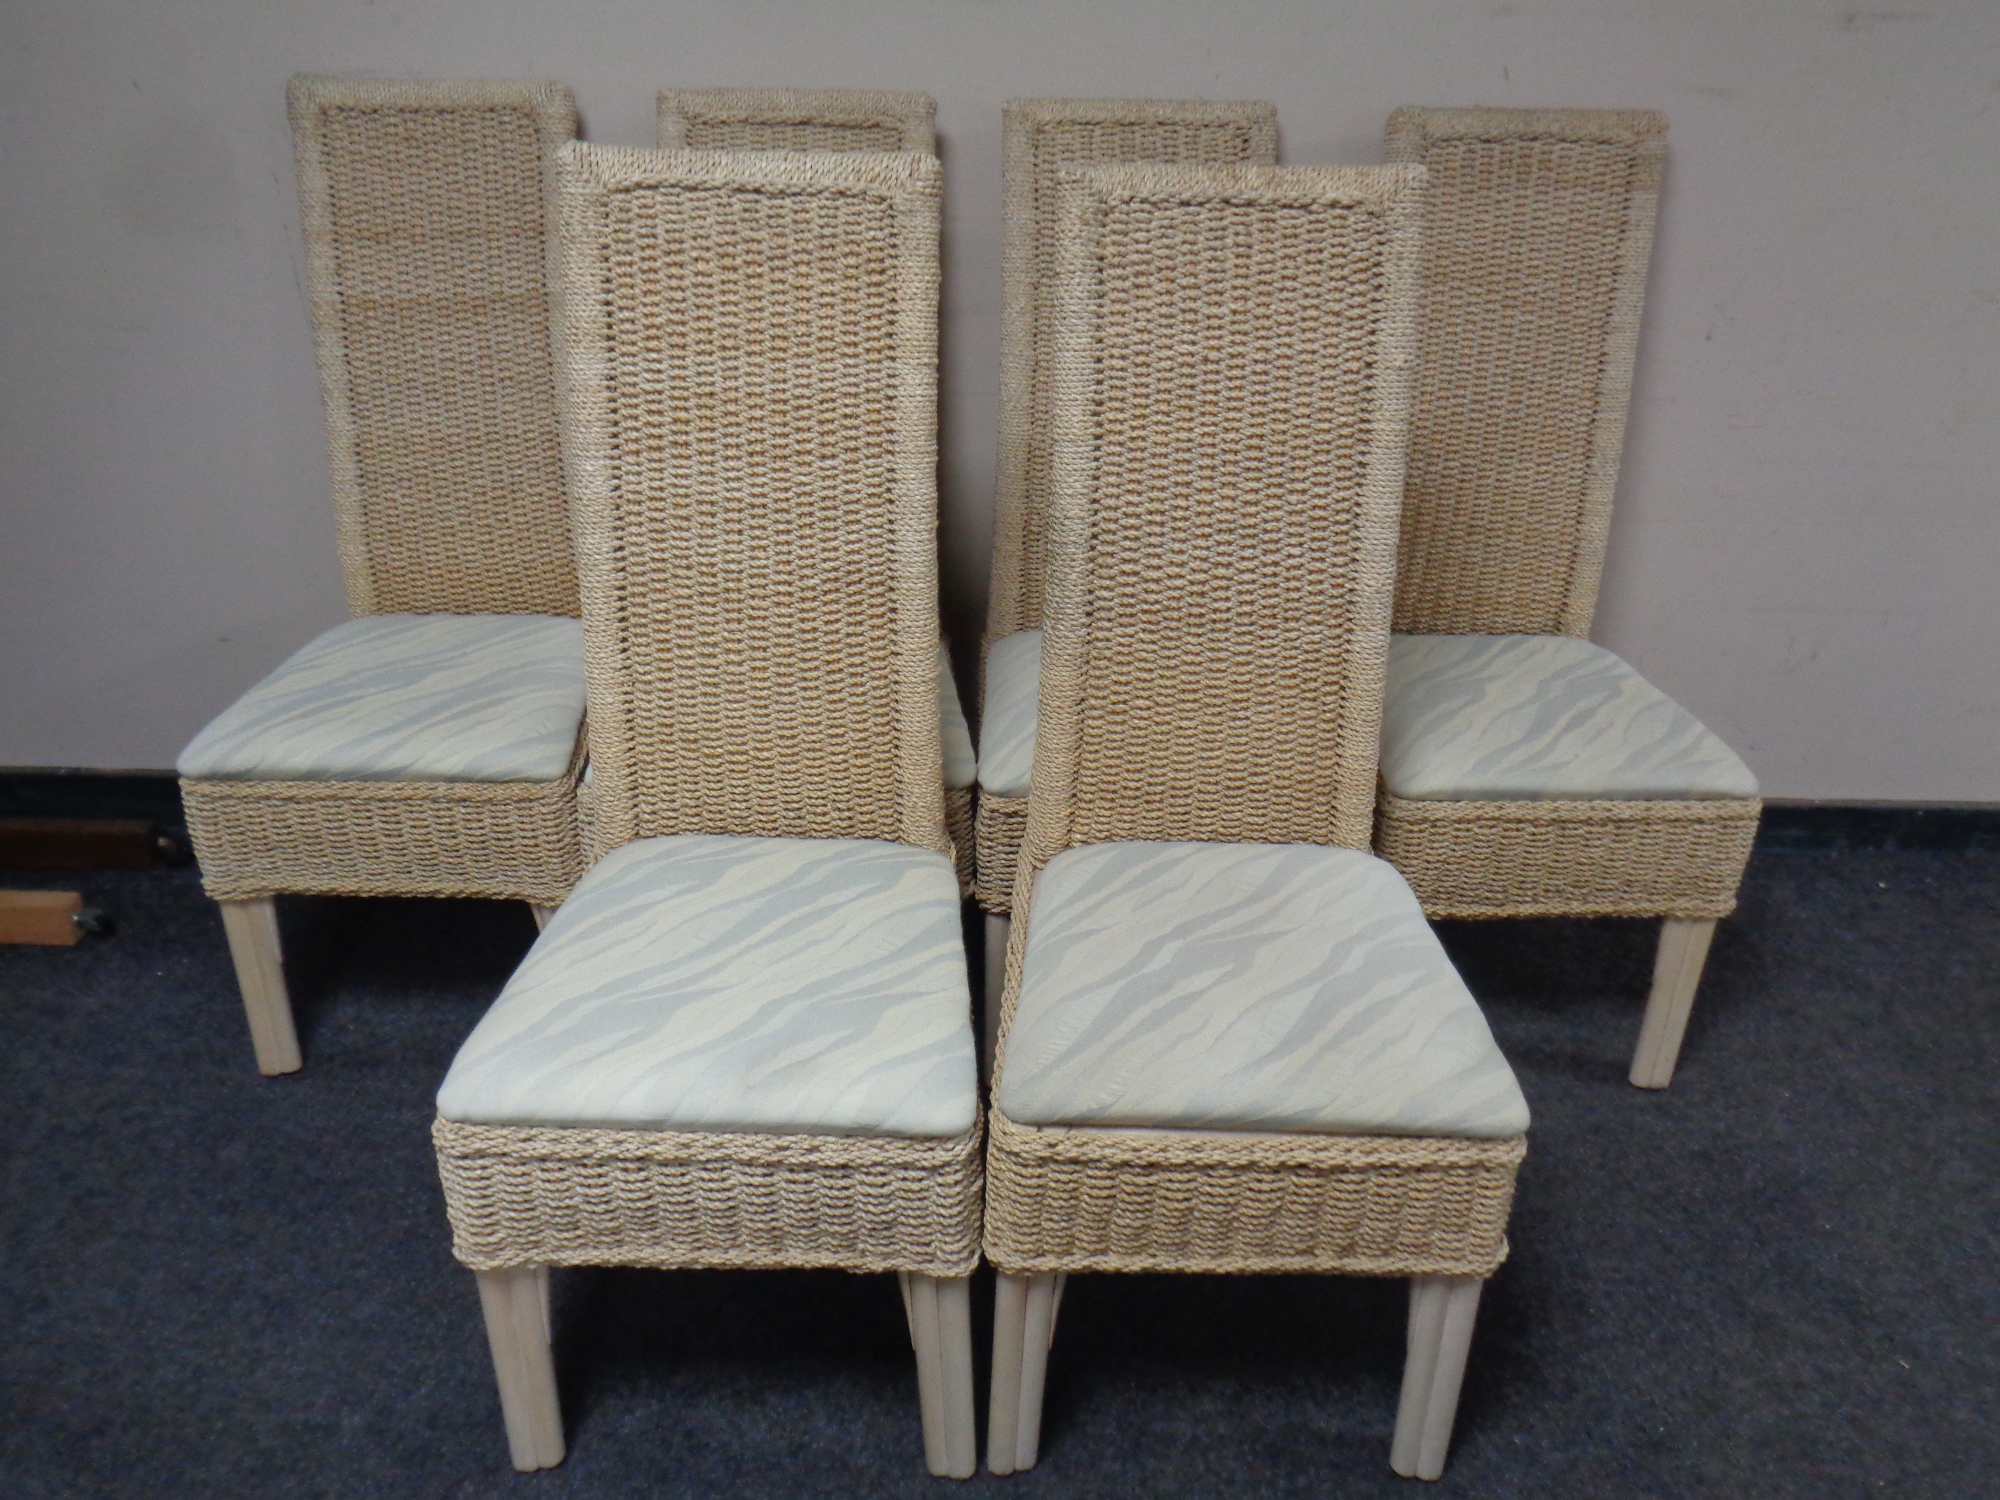 Six contemporary wicker high back dining chairs